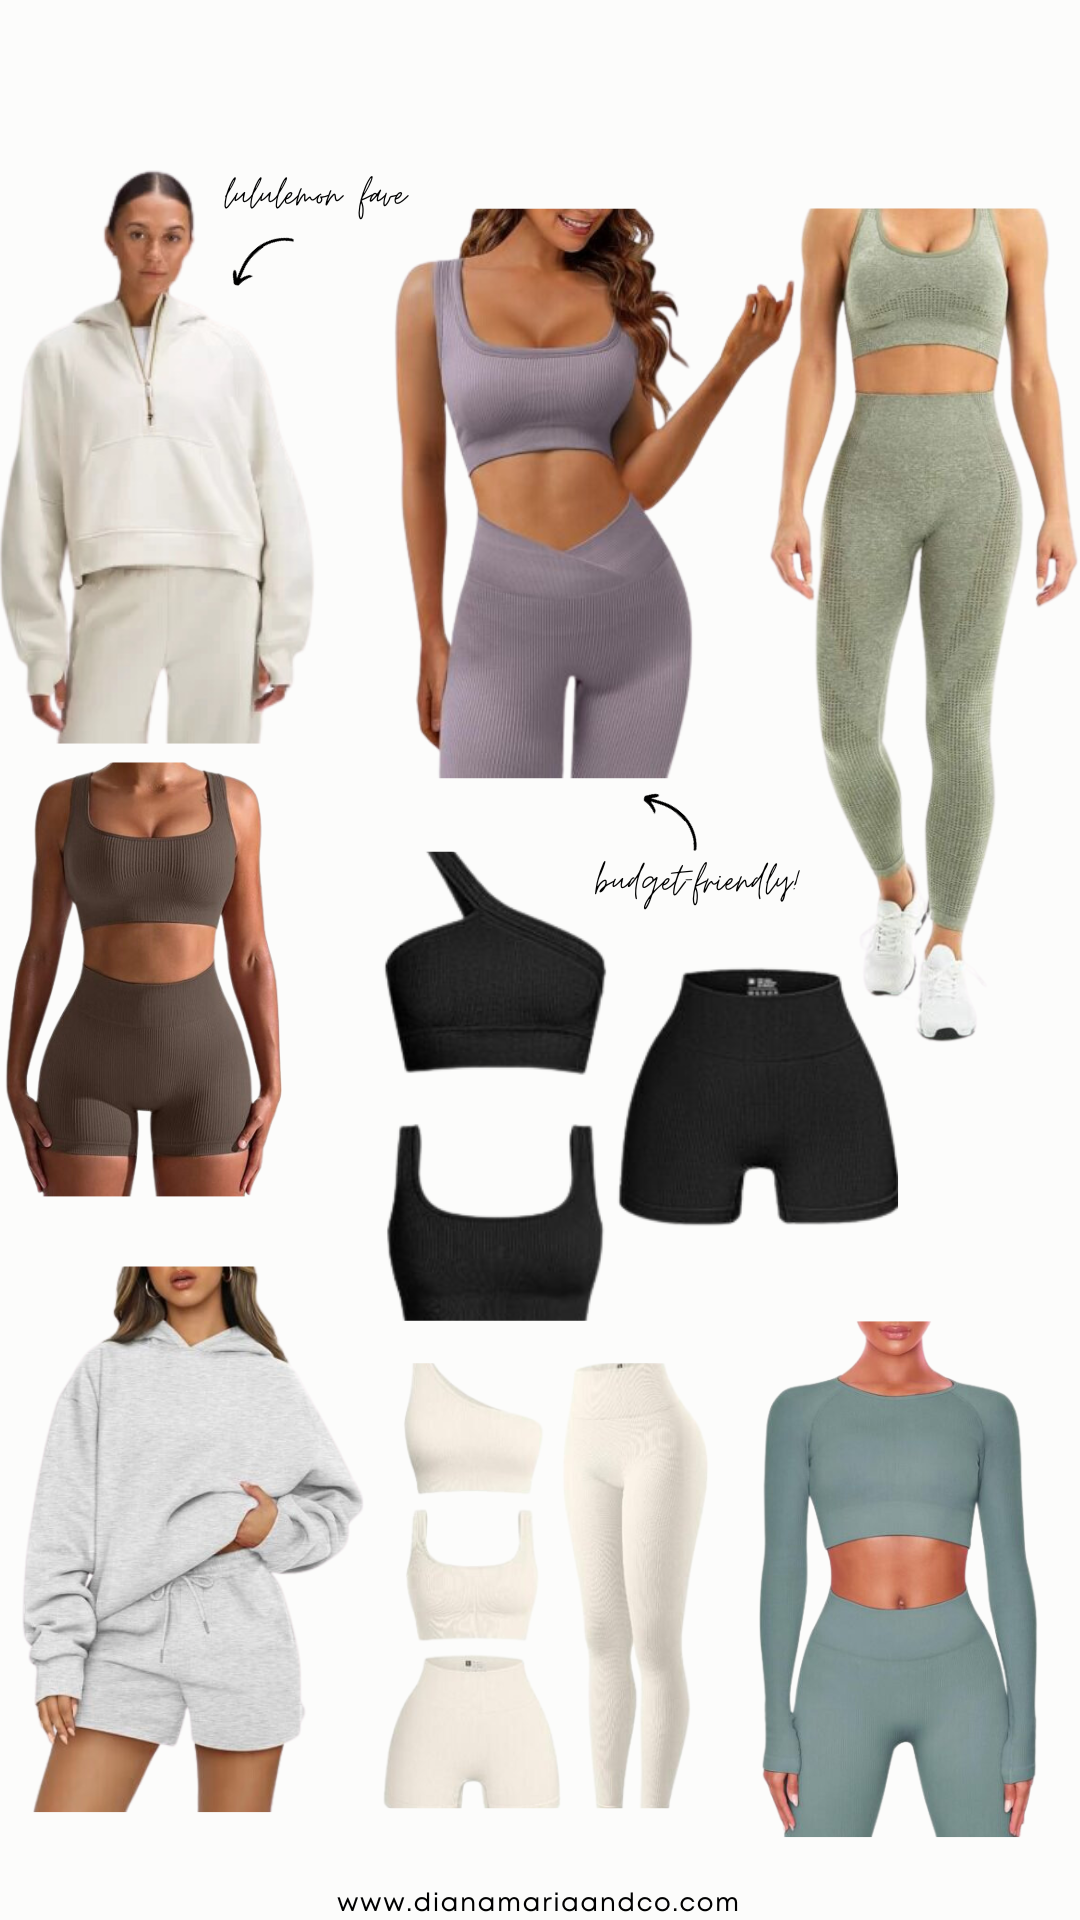 The Best Workout Sets For Any Exercise You'll Love Wearing - Diana